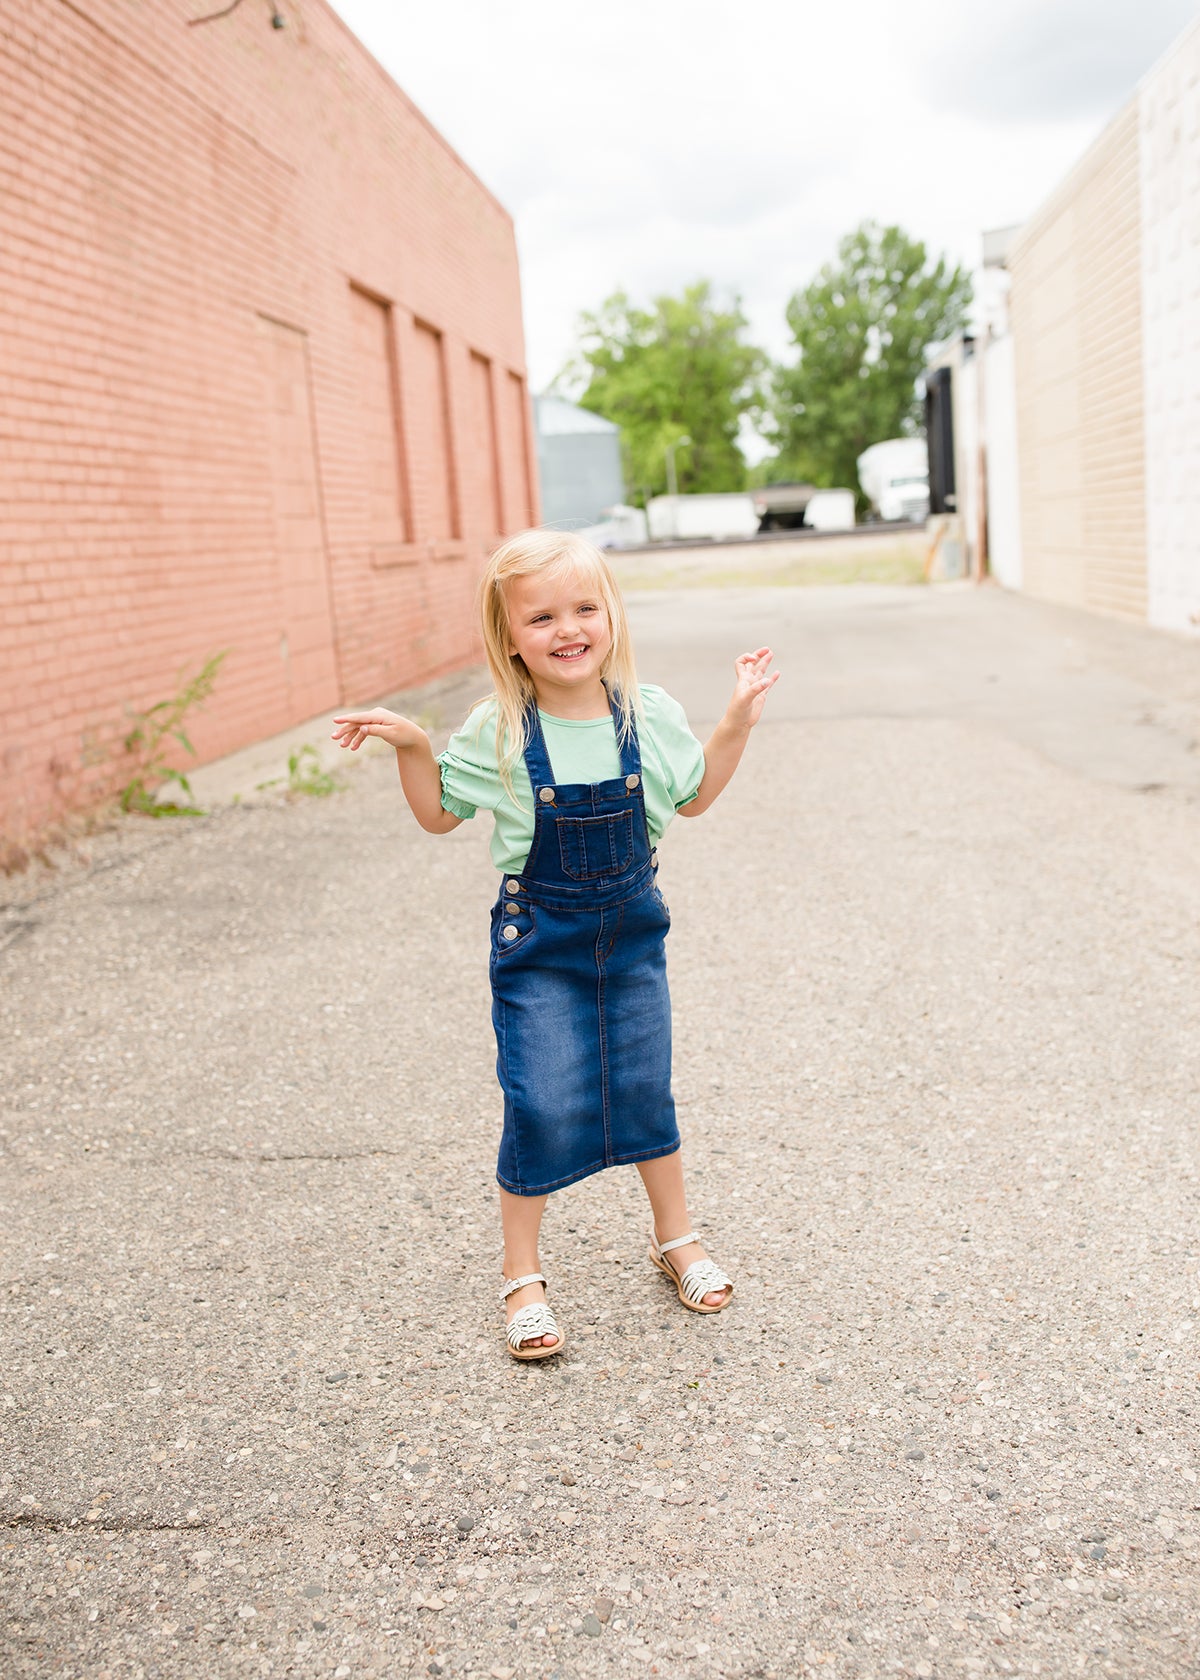 young girl in overall denim jumper dress